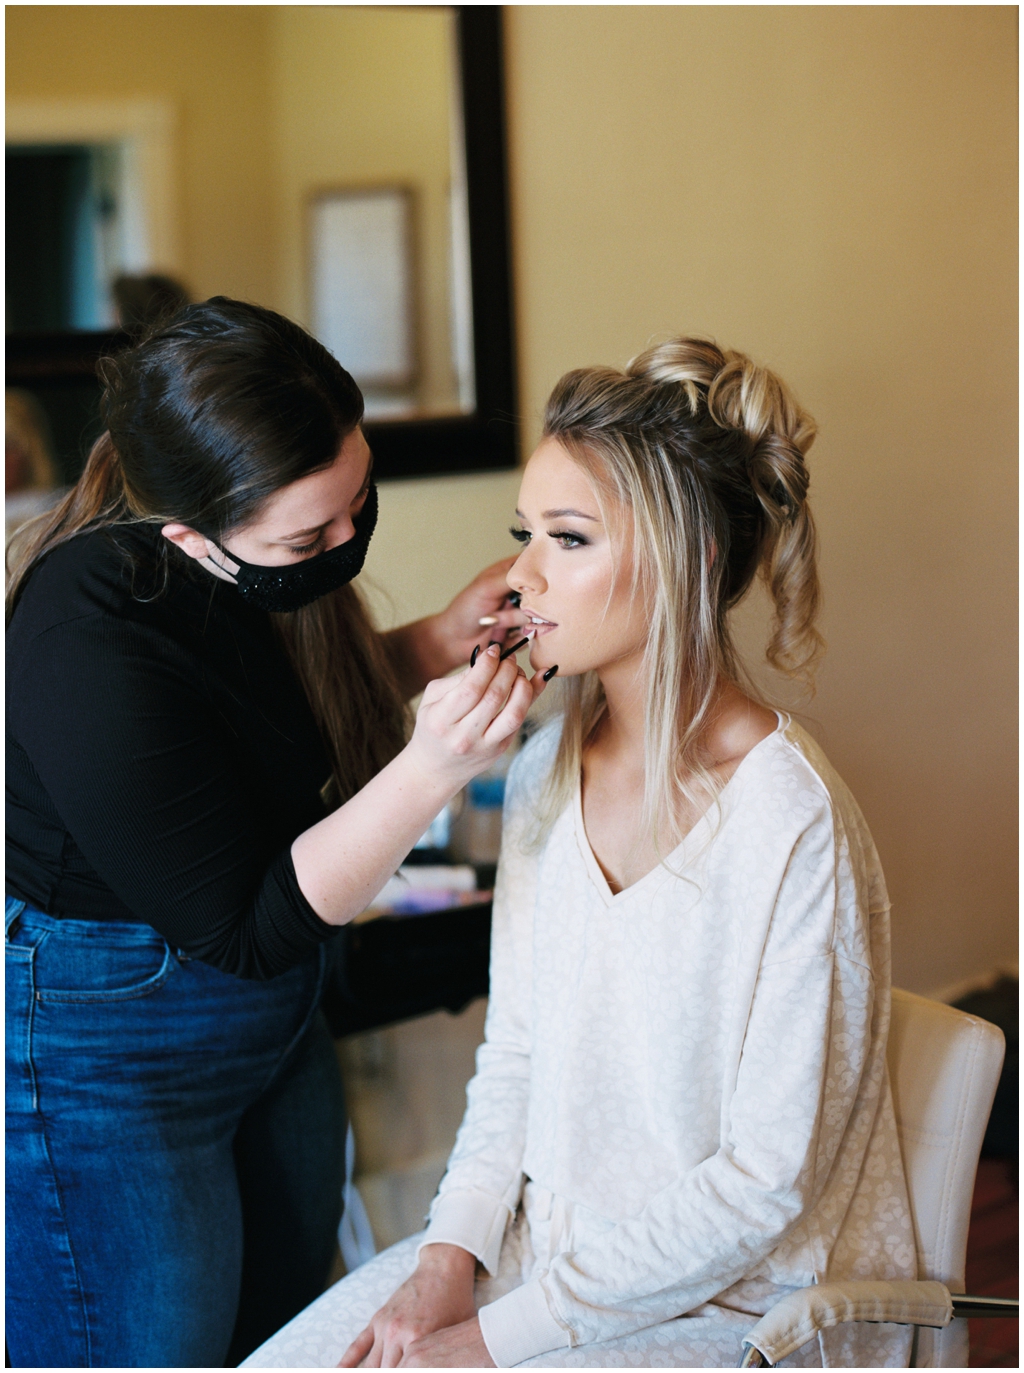 Emily Ann Roberts getting makeup applied on her wedding day